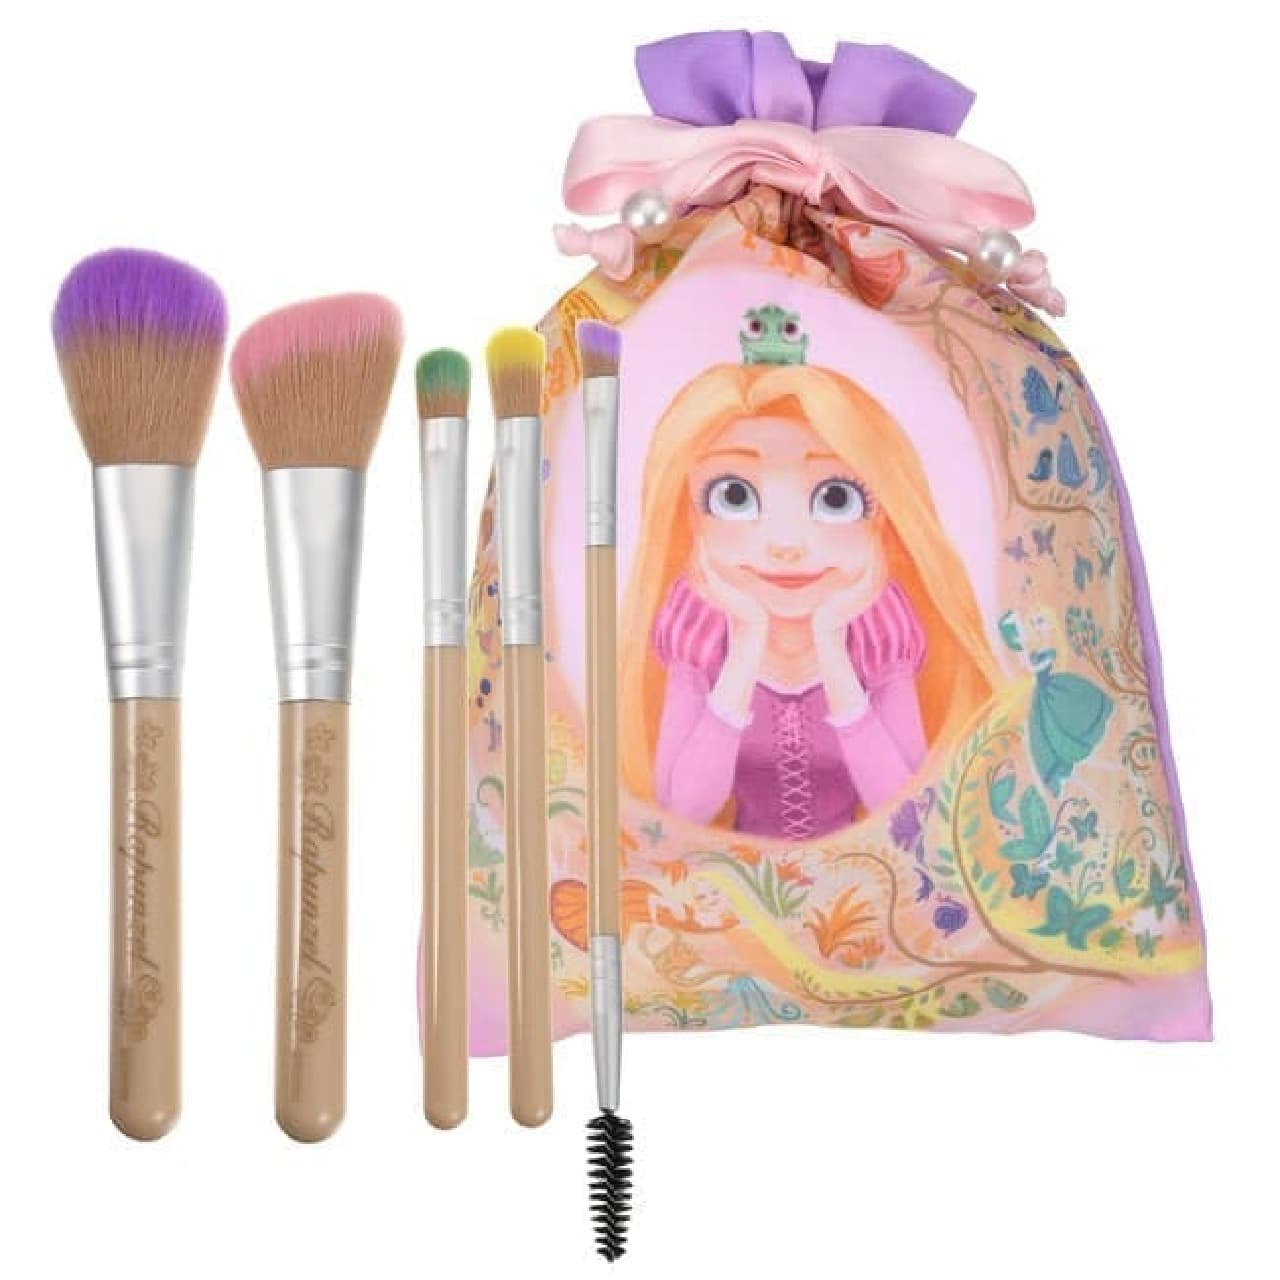 "Rapunzel on the Tower" 10th Anniversary Goods at Disney Store --Beautiful Eyeshadow Palettes, Figures, etc.